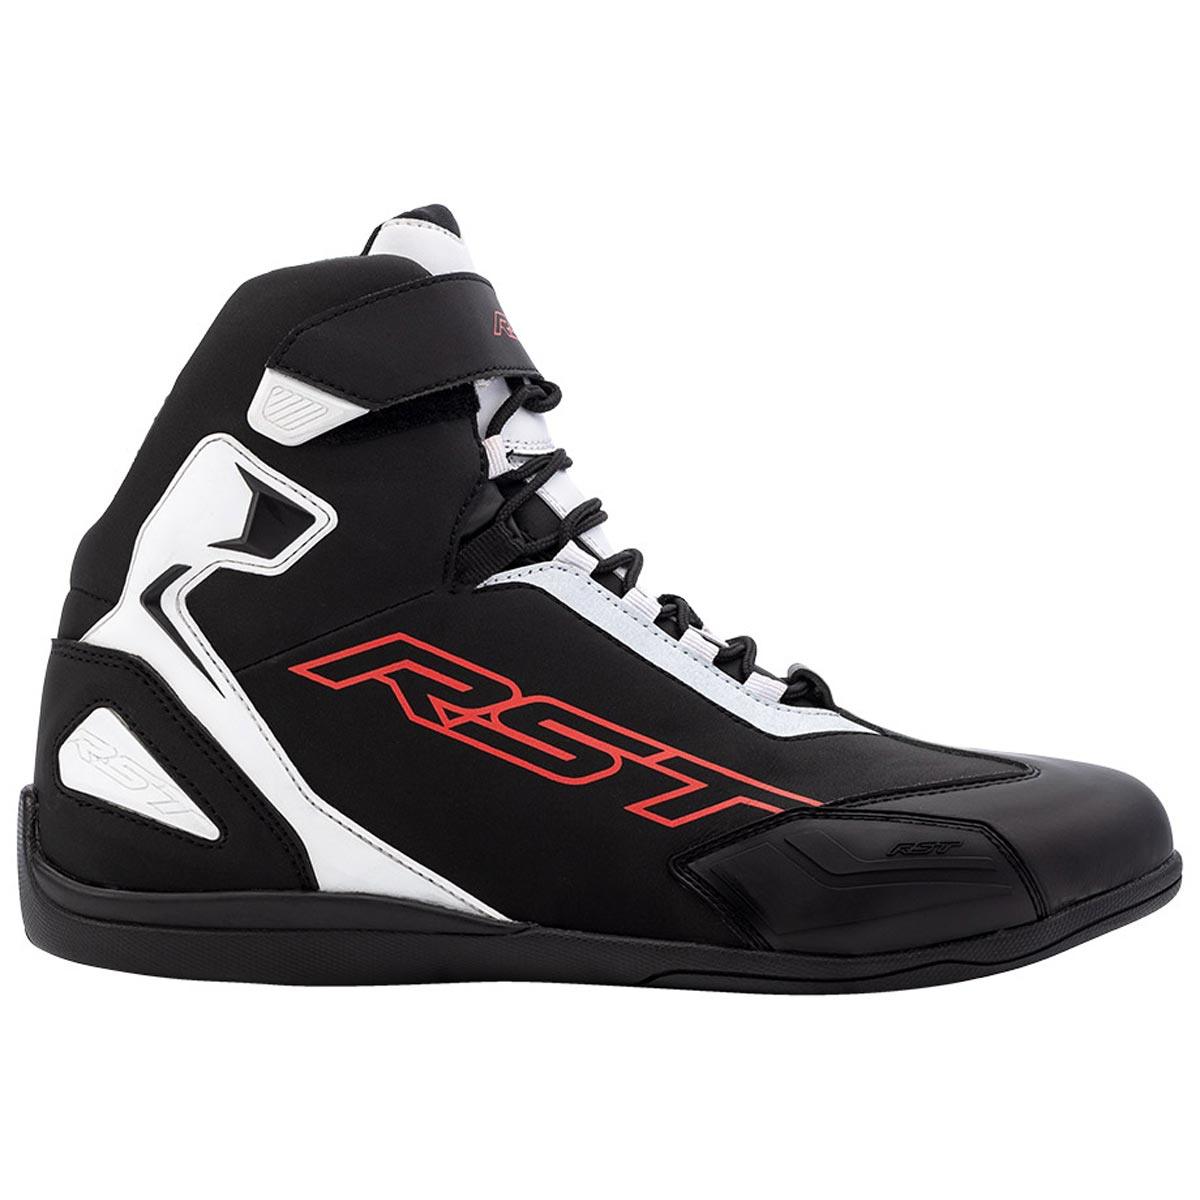 RST Sabre Moto Shoes CE Black White Red 47